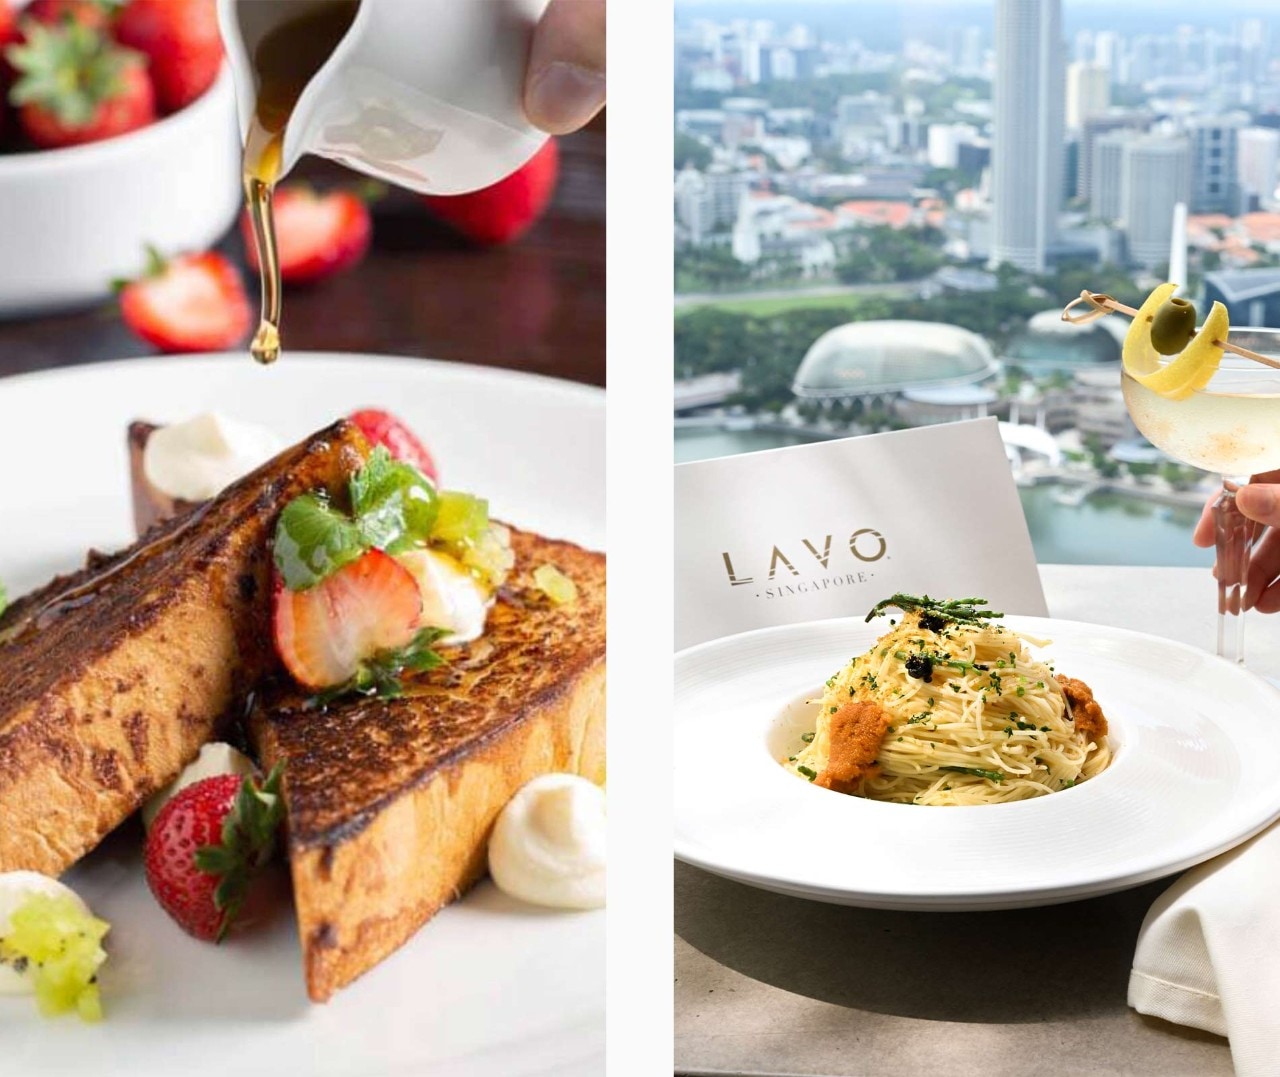 Pasta and french toast at LAVO, a popular brunch spot in Singapore